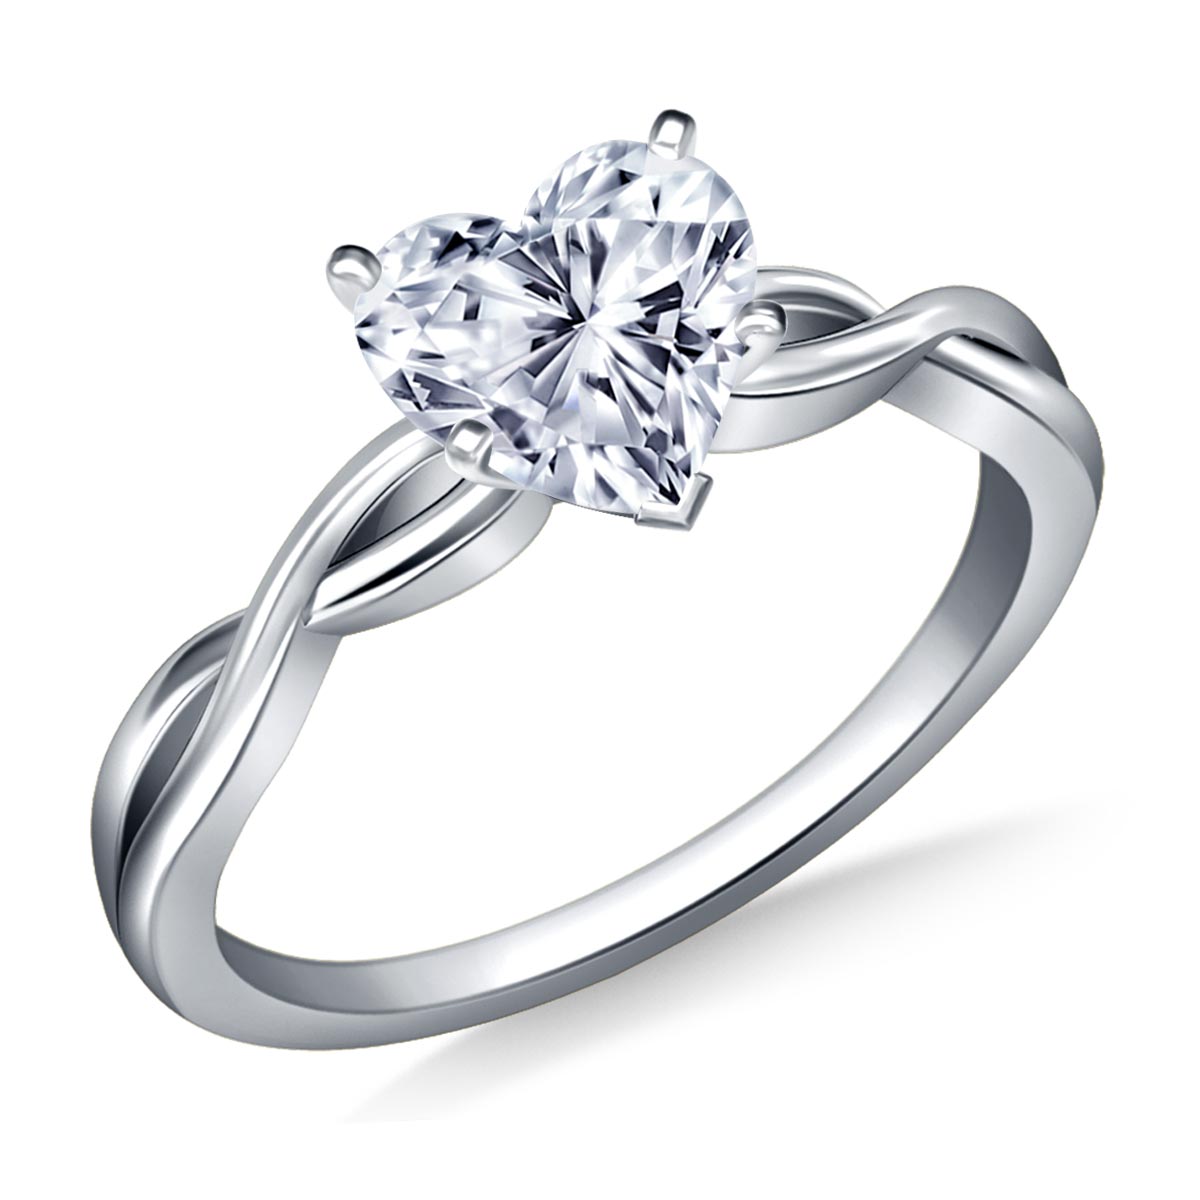 Infinity Knot Solitaire Engagement Ring in 14K White Gold (3.0 mm)